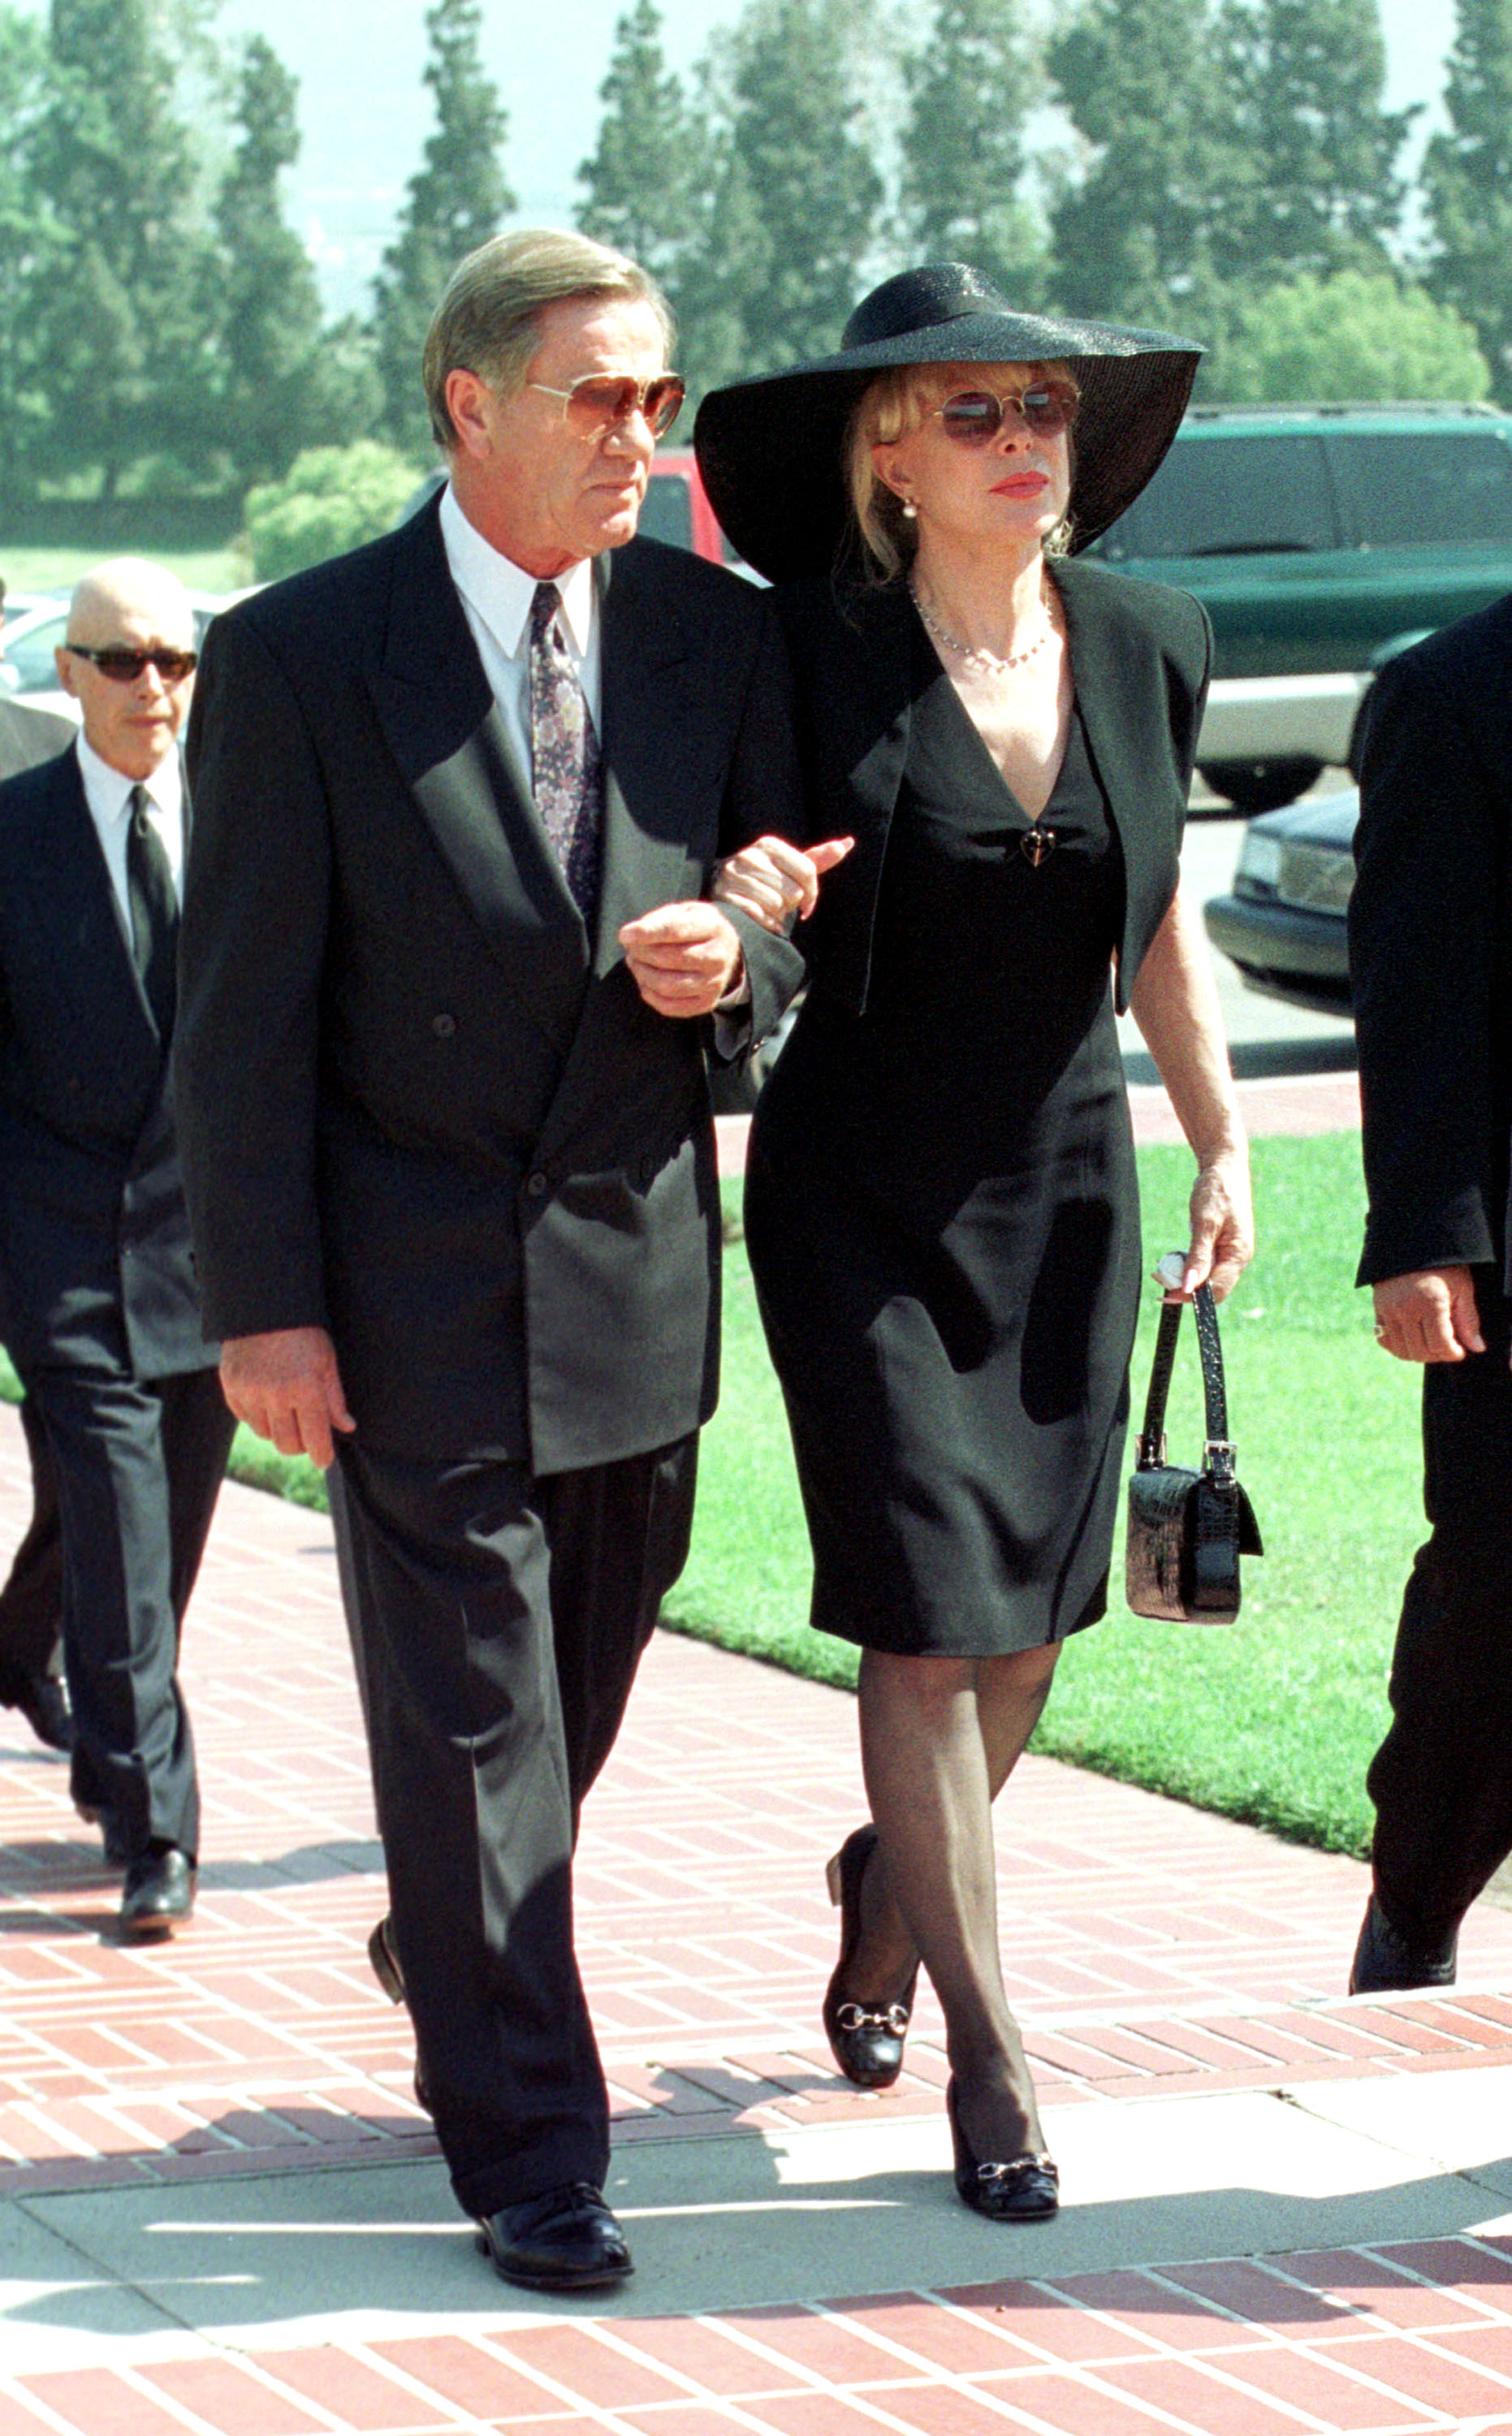 Barbara Eden and her husband Jon Eicholtz arrive at the Forest Lawn Cemetery for her son Matthew Ansara's funeral service on July 2, 2001 in Los Angeles, California | Source: Getty Images